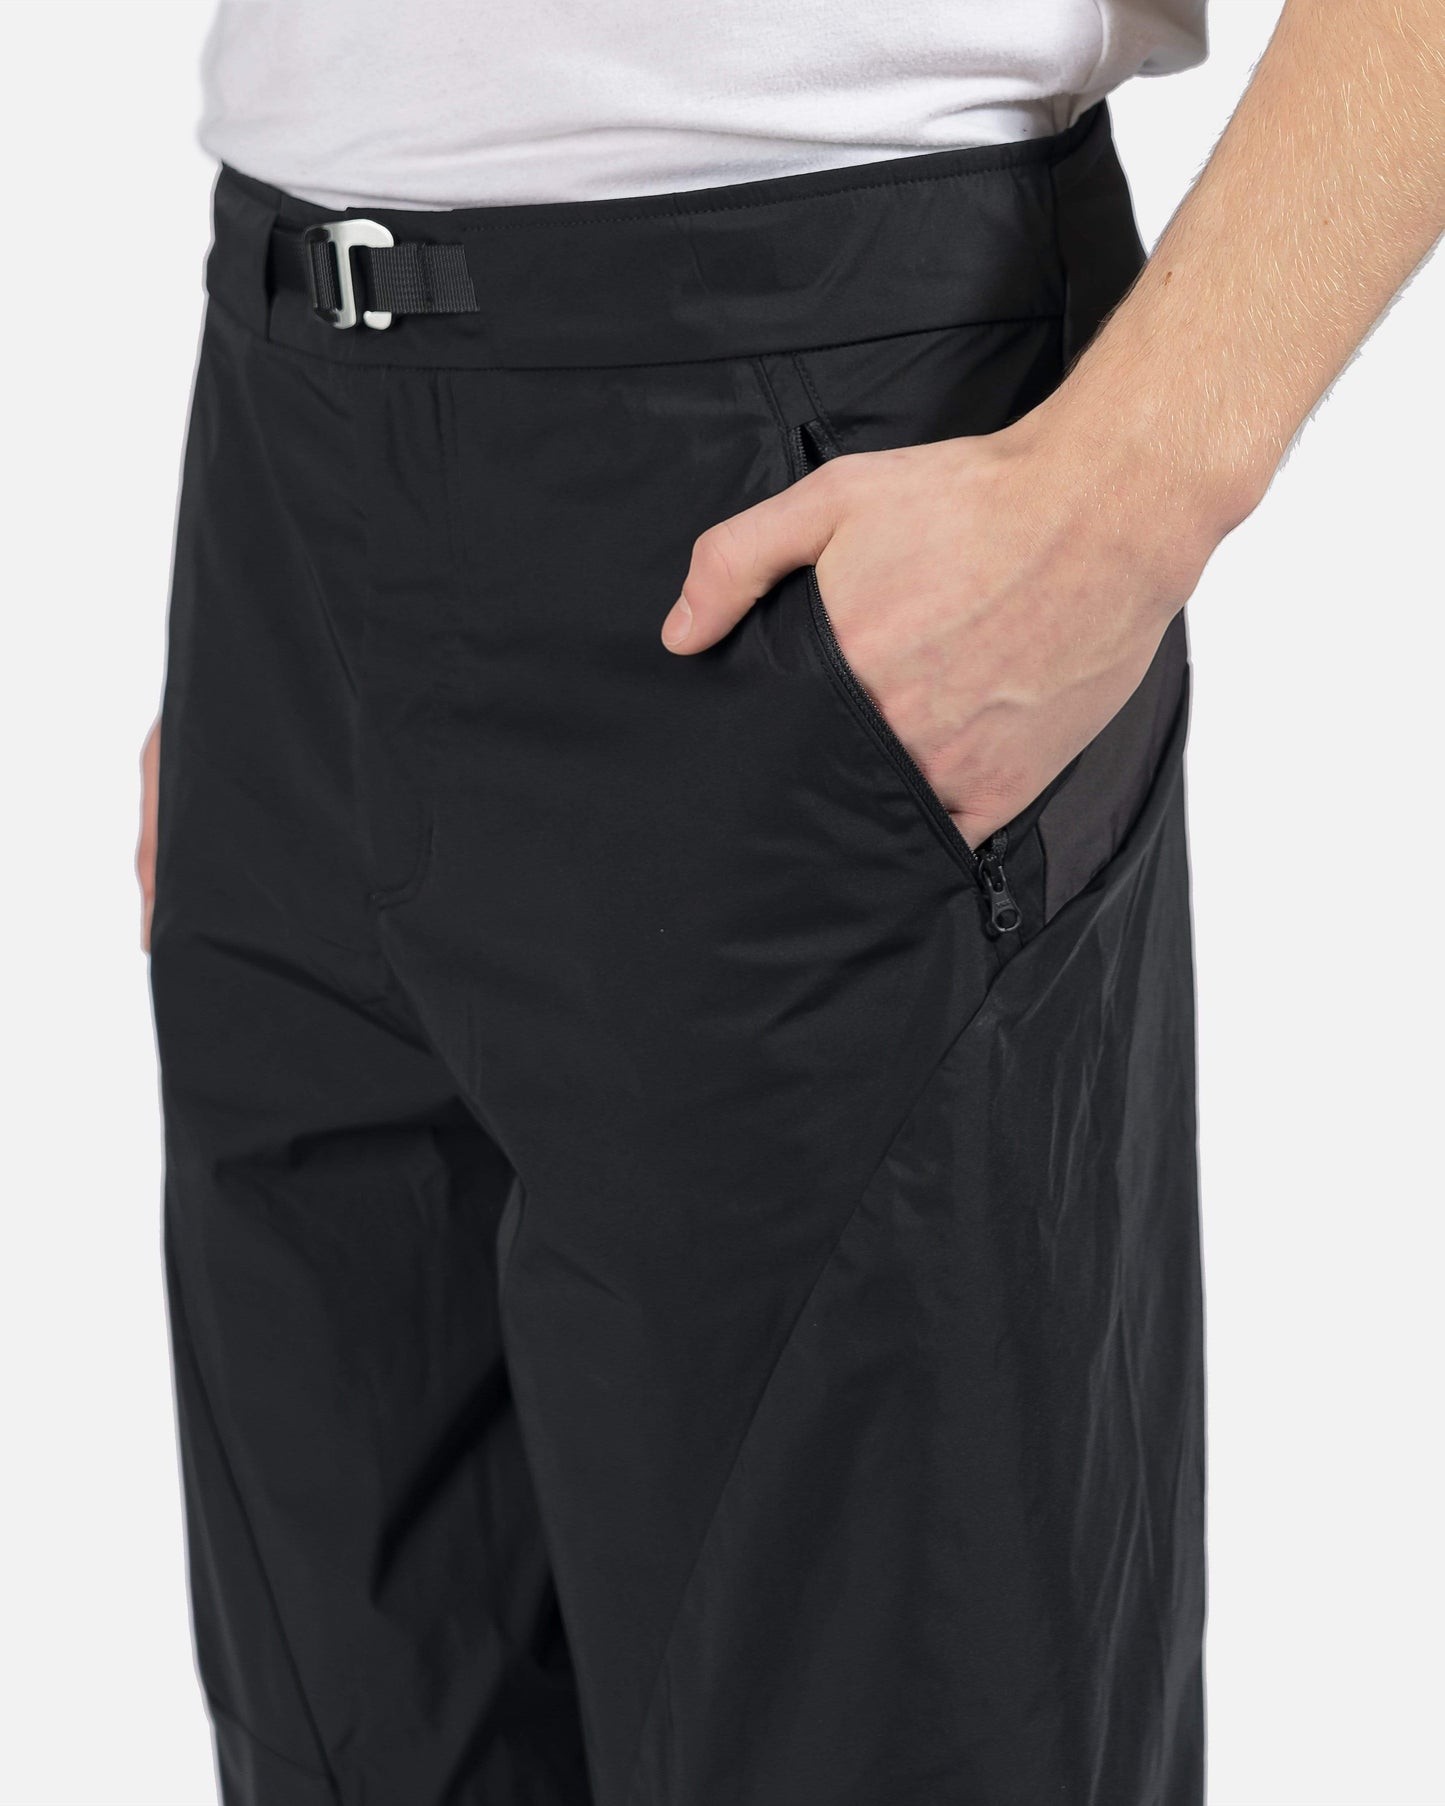 POST ARCHIVE FACTION (P.A.F) Men's Pants 4.0+ Technical Pants Right in Black